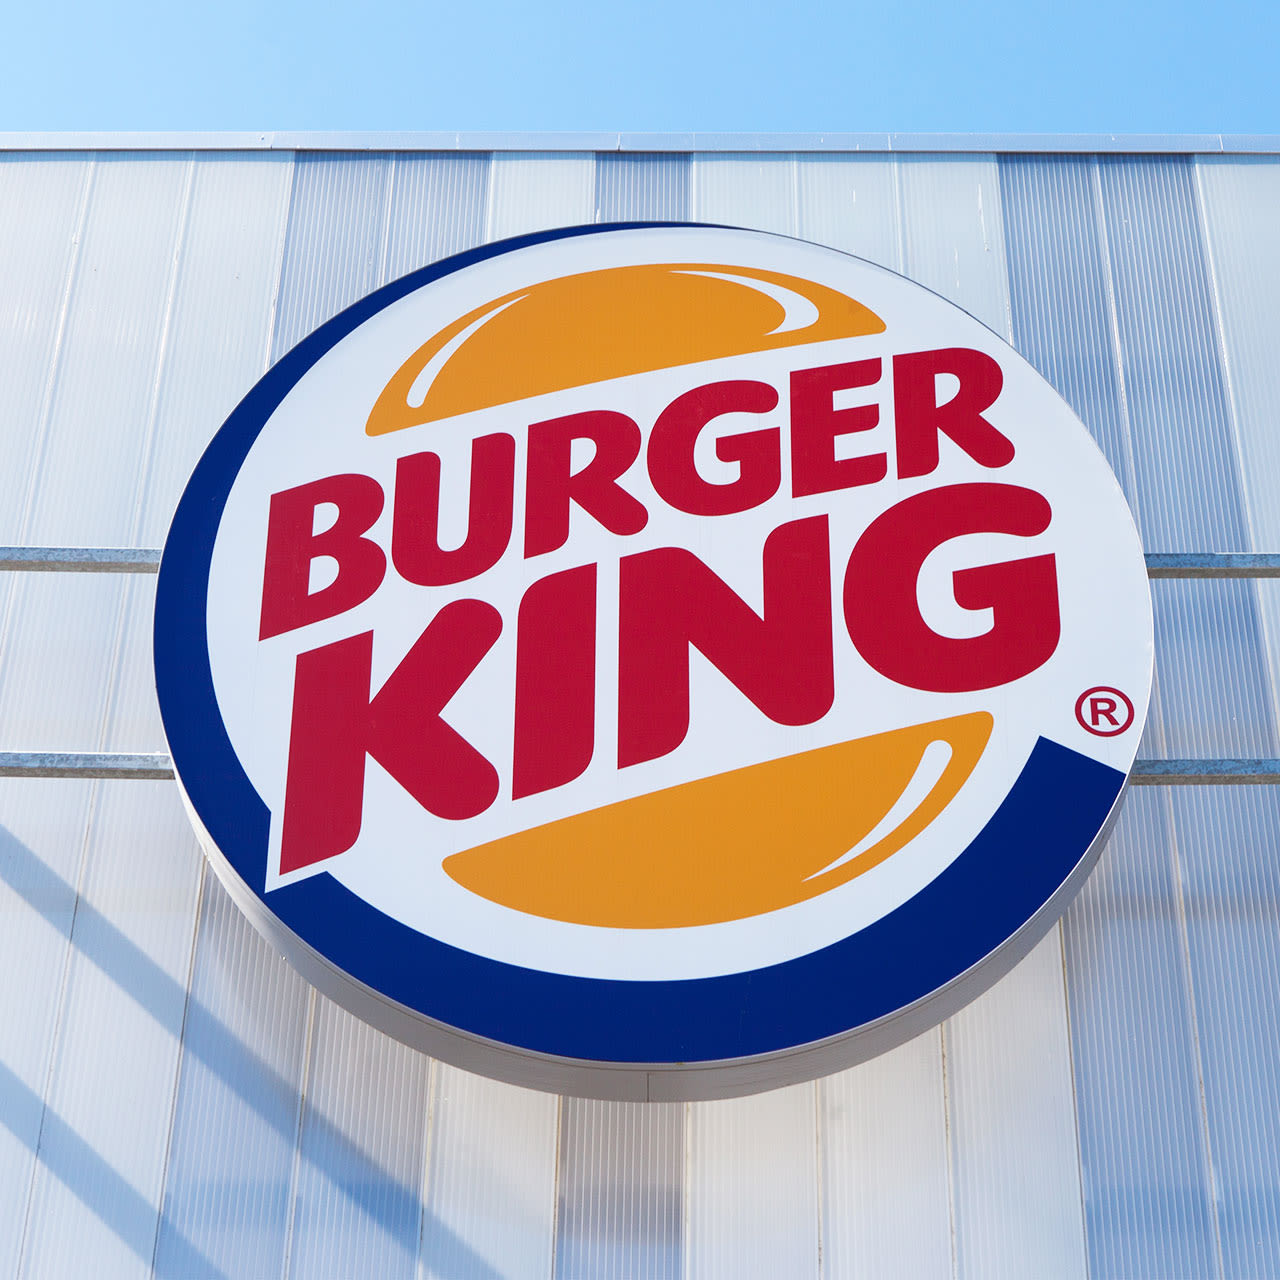 Burger King Just Added 3 New Cheesy Items To Their Menu: Philly Royal Crispy Wrap & More